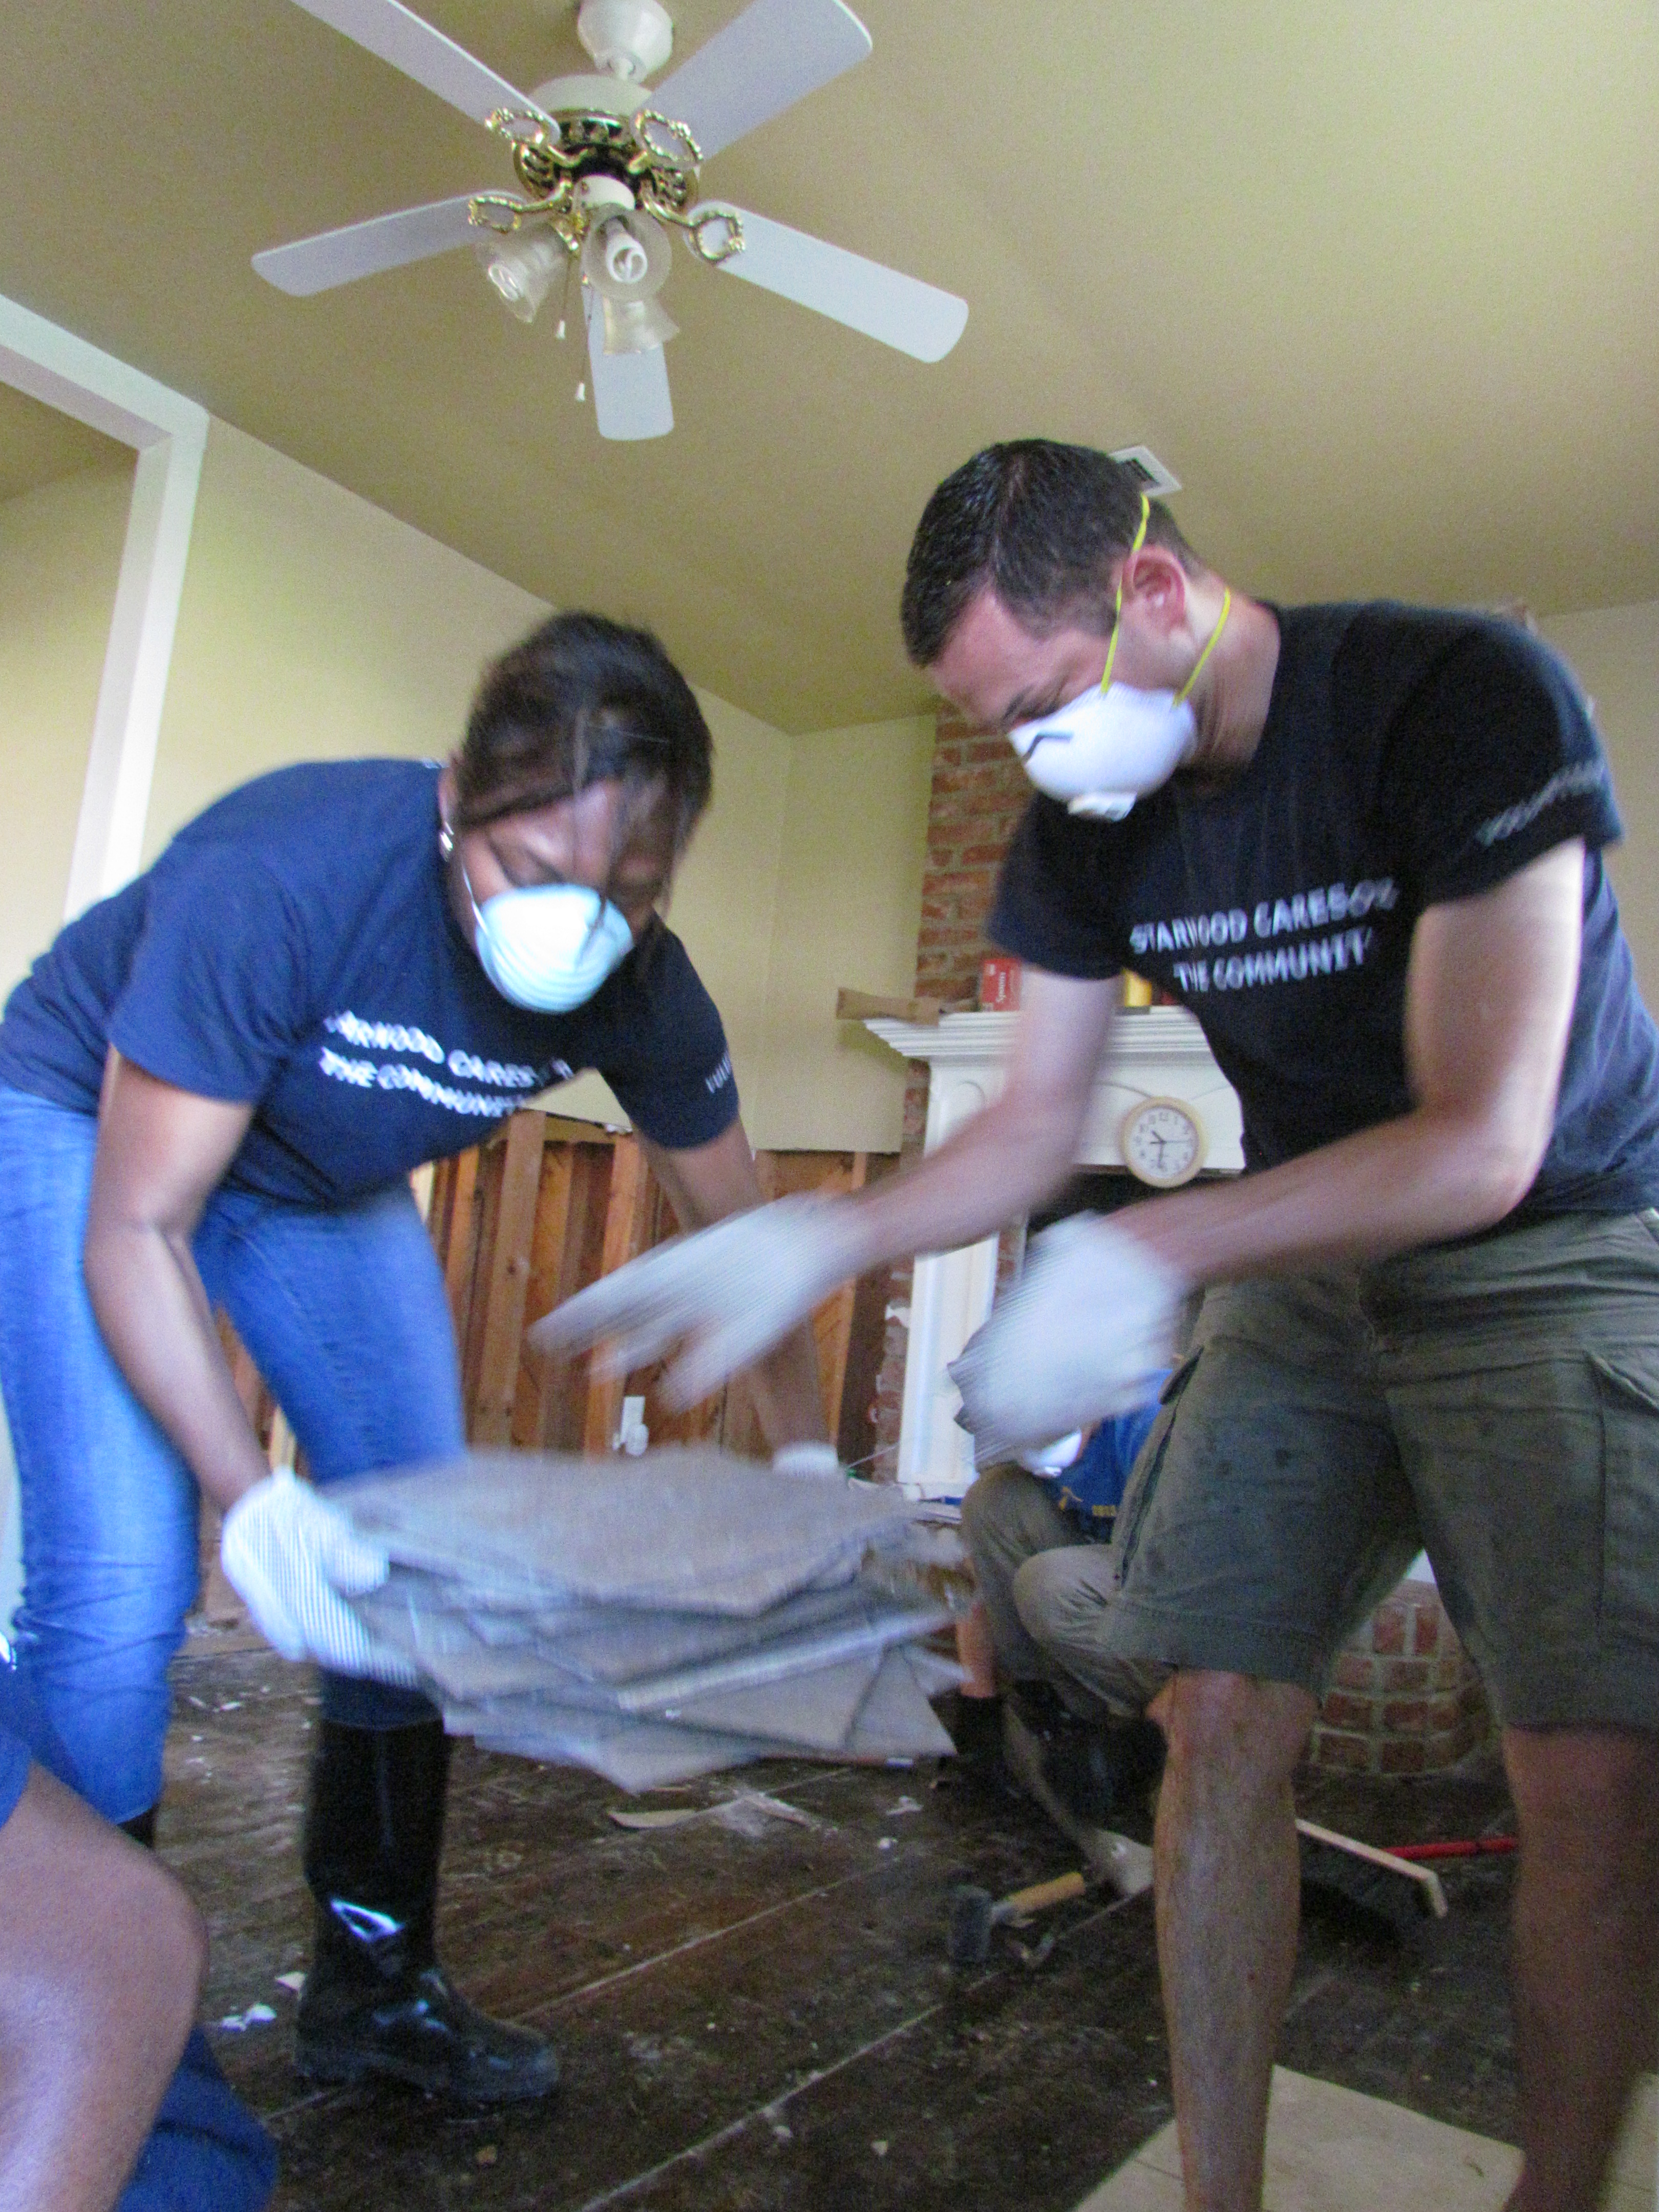 Volunteers removing tiles from a flooded home.